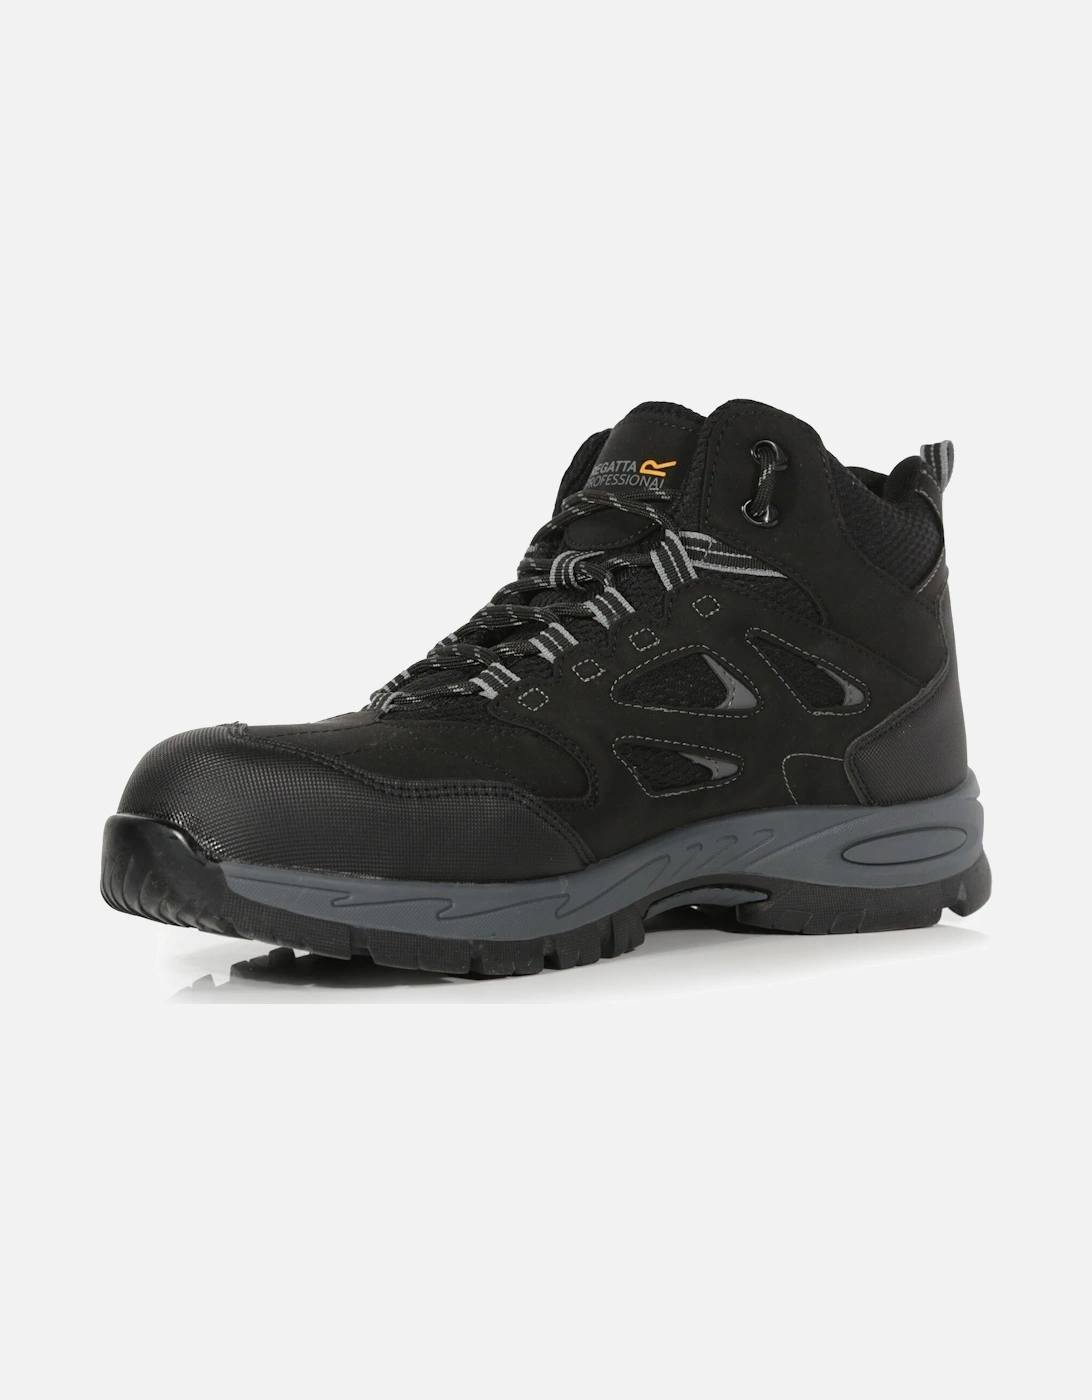 Mens Mudstone Safety Boots